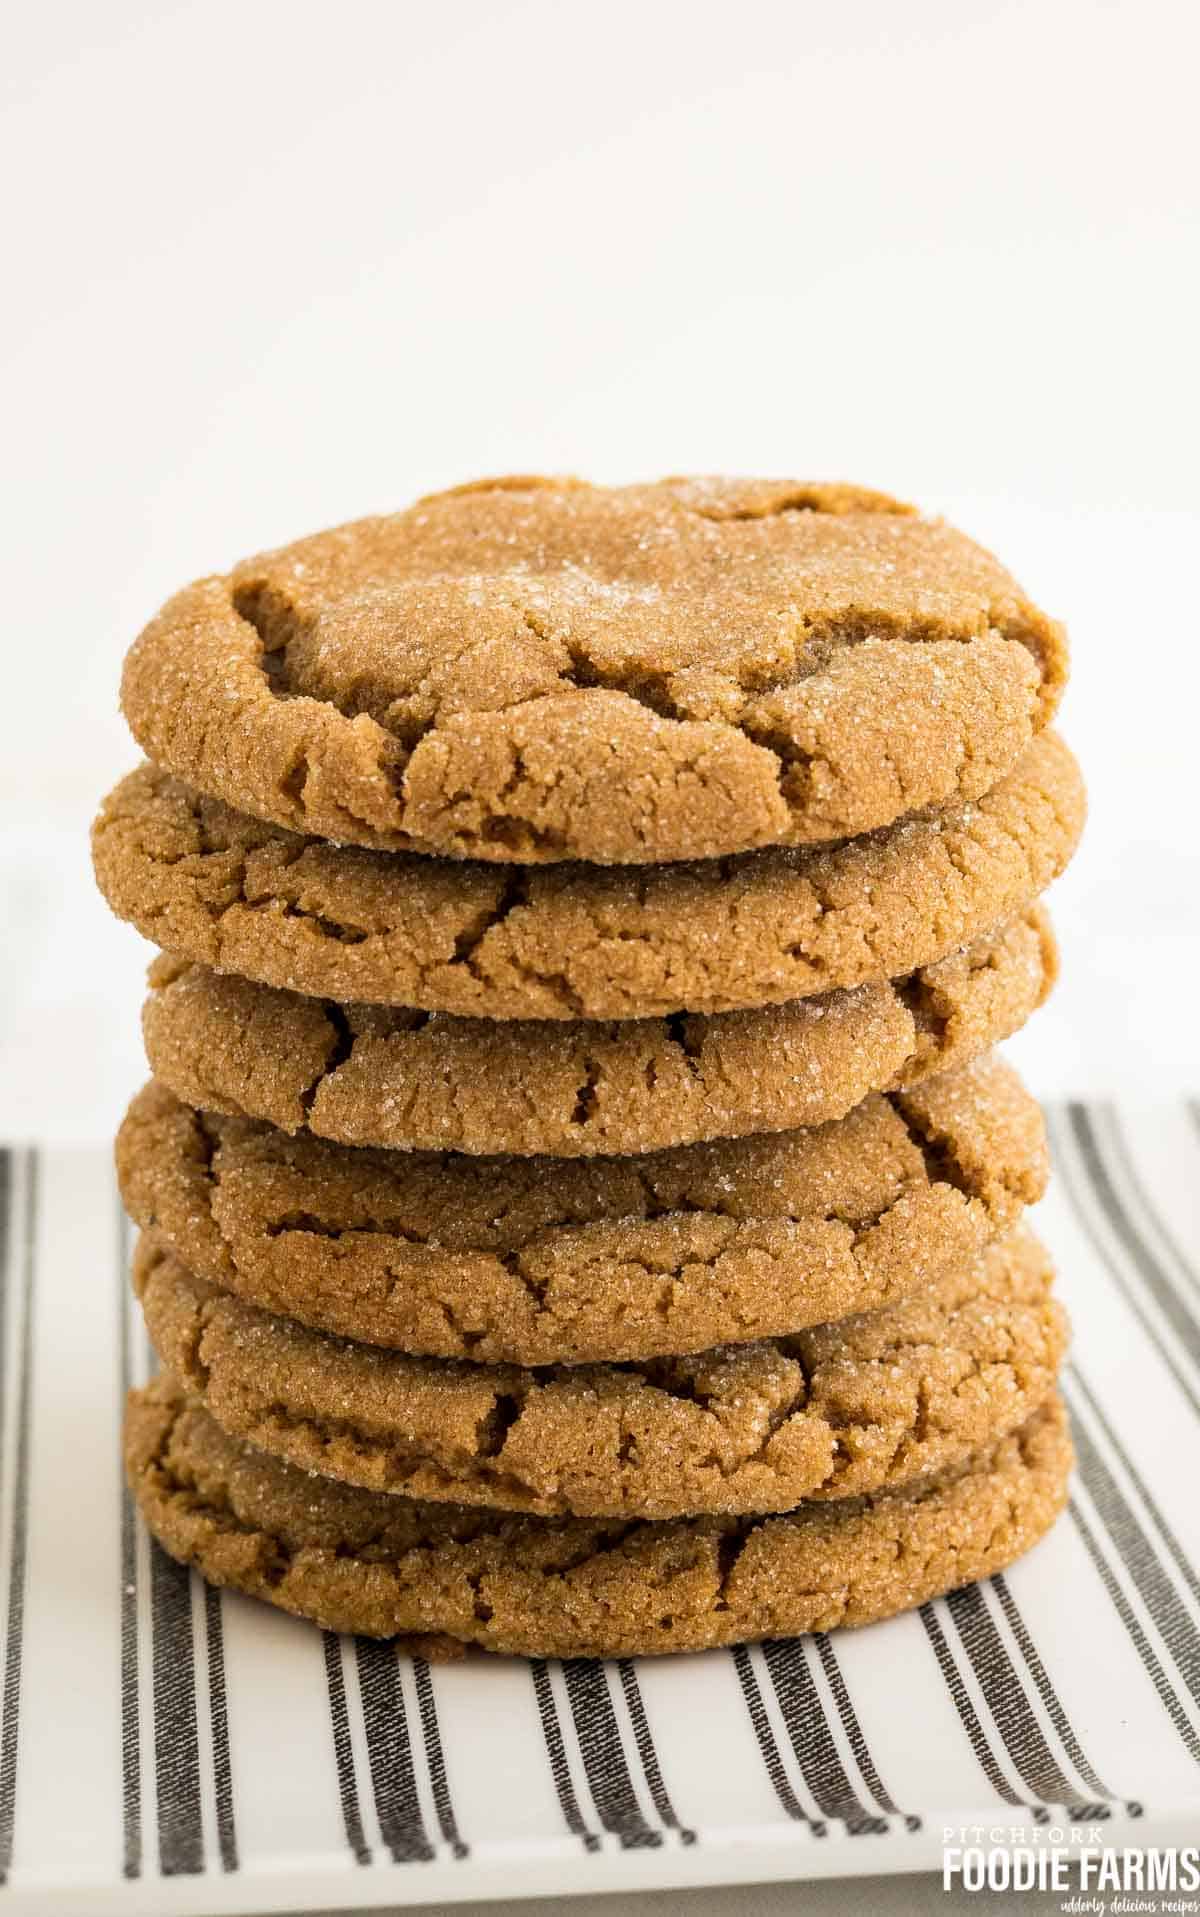 A stack of baked gingersnap cookies on a striped plate.